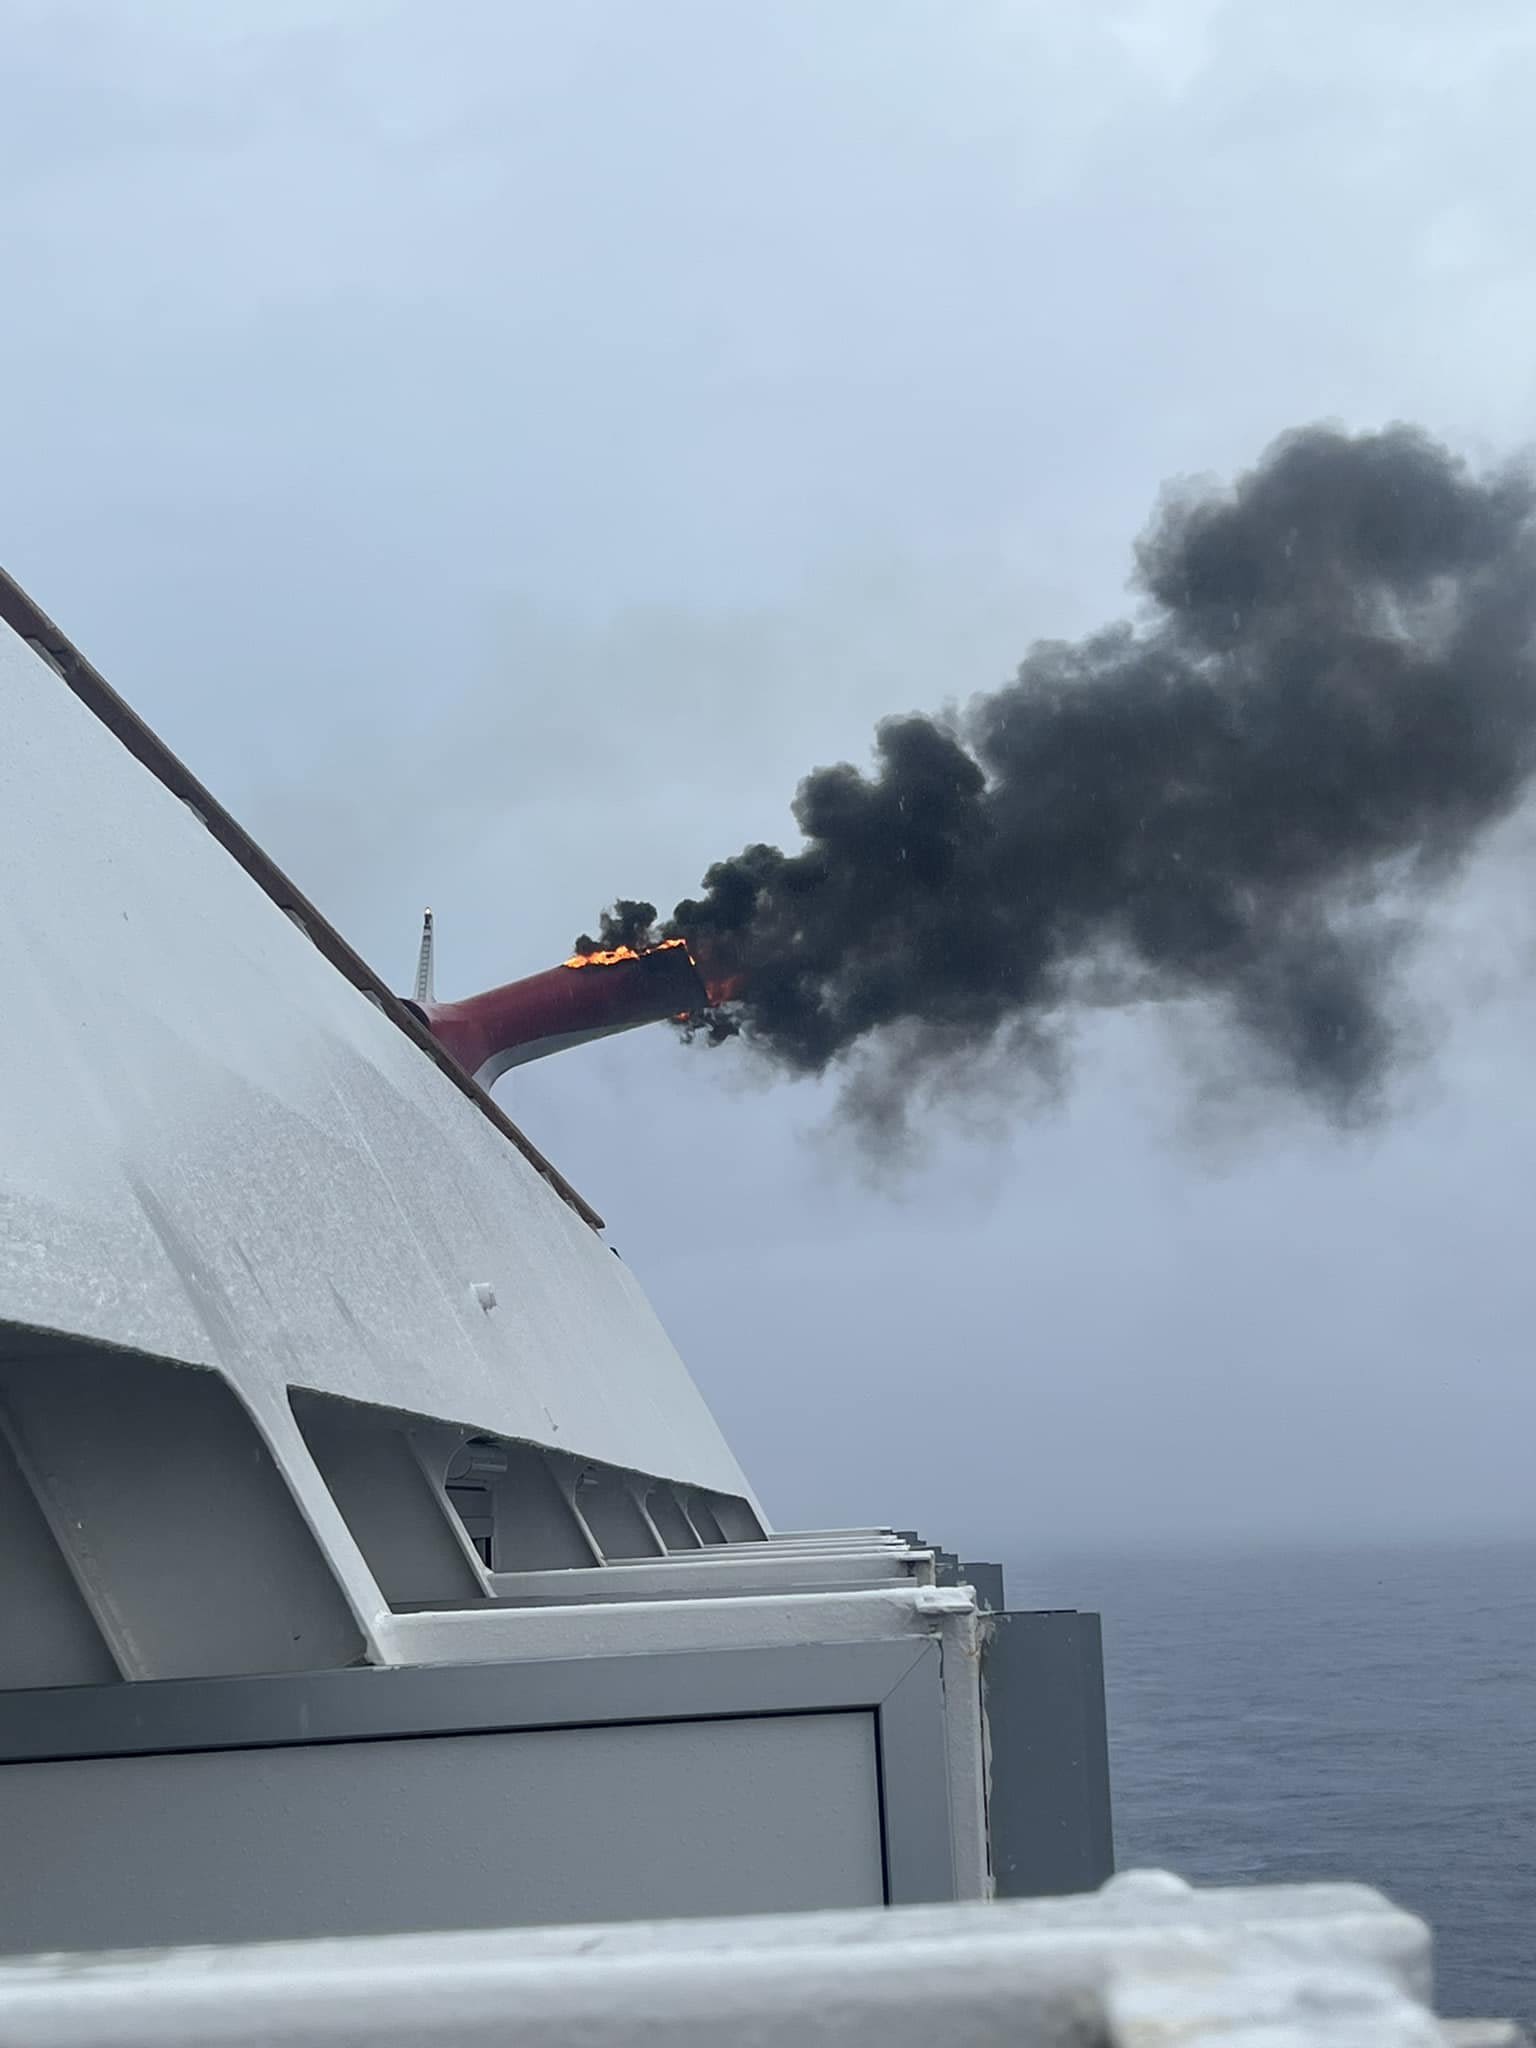 Fire extinguished on Carnival Freedom cruise ship after witnesses reported possible lightning strike - Accidents and Disasters - News